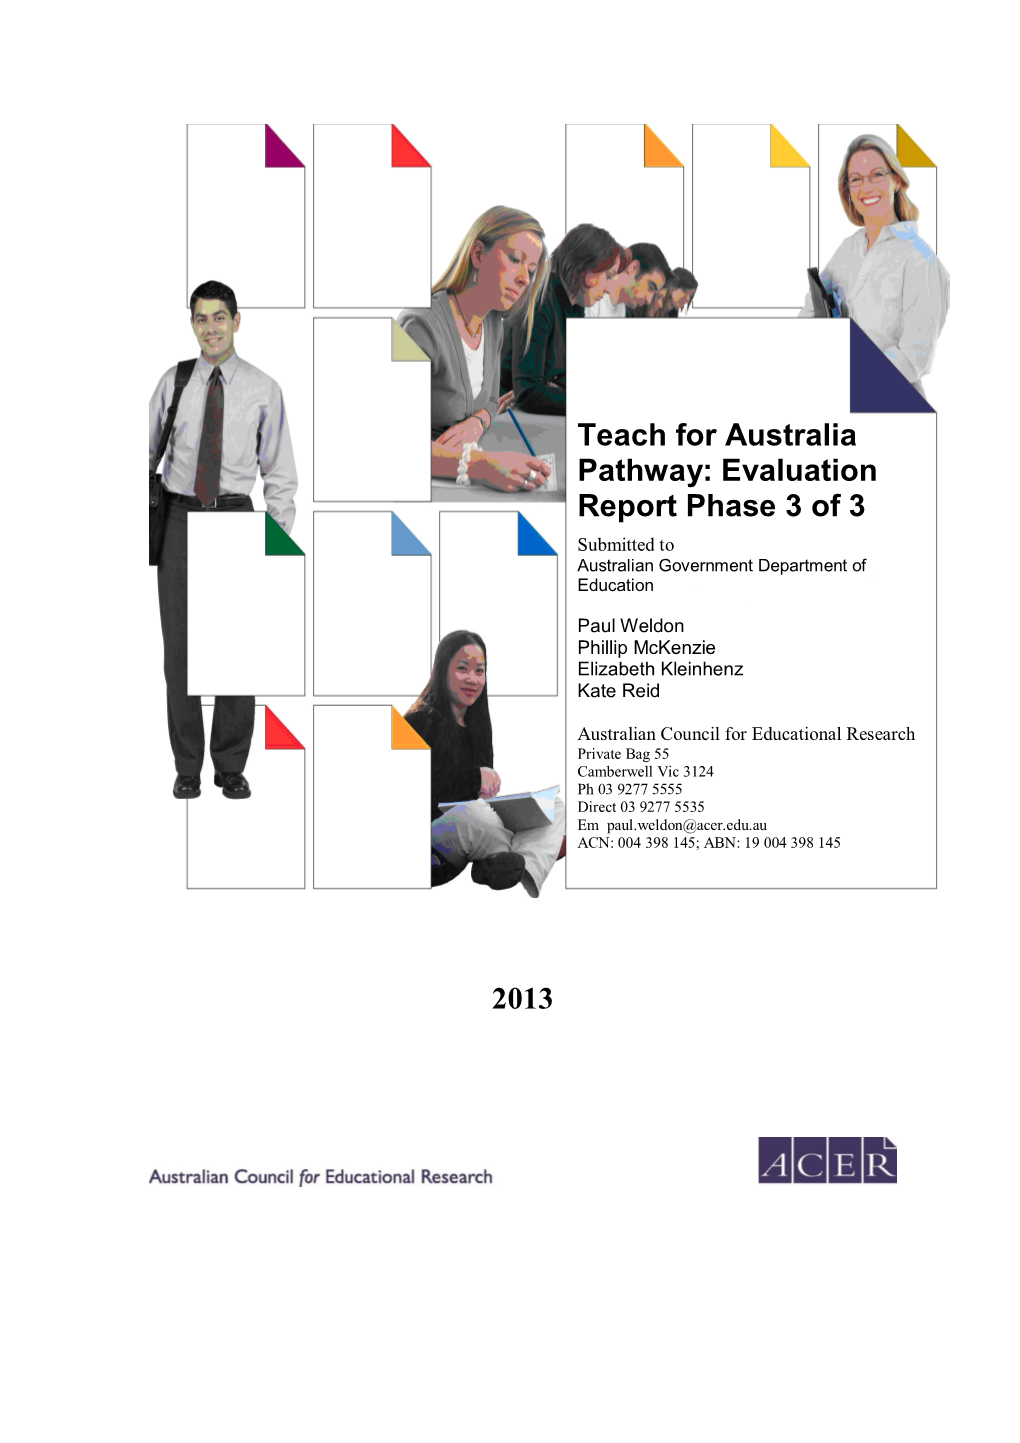 Teach for Australia Pathway: Evaluation Report Phase 3 of 3 Submitted to Australian Government Department of Education